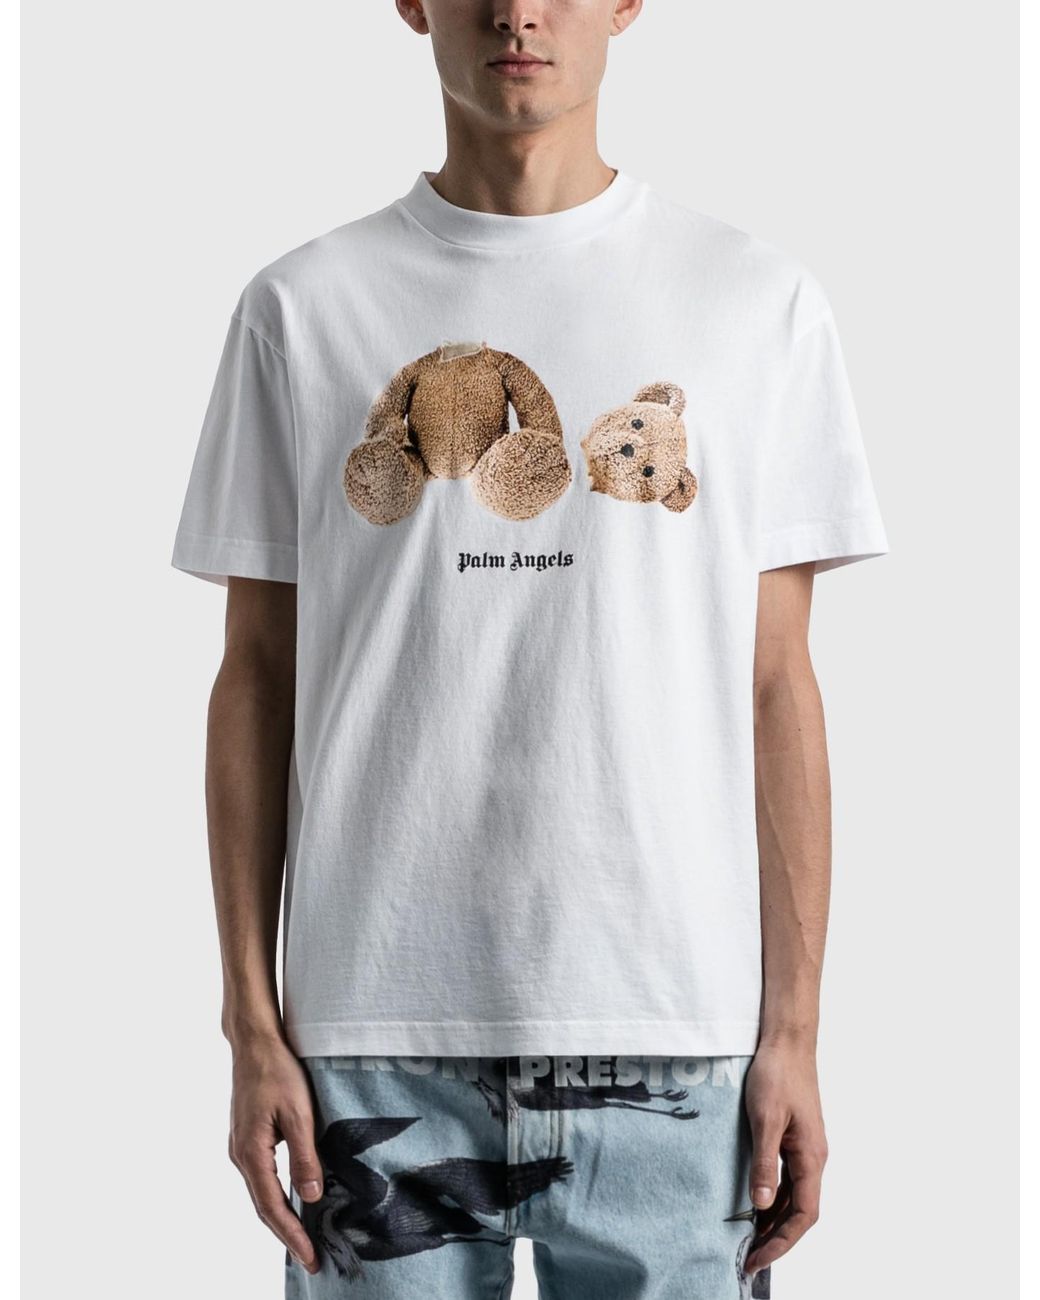 Palm Angels Bear T-shirt in White for Men - Lyst